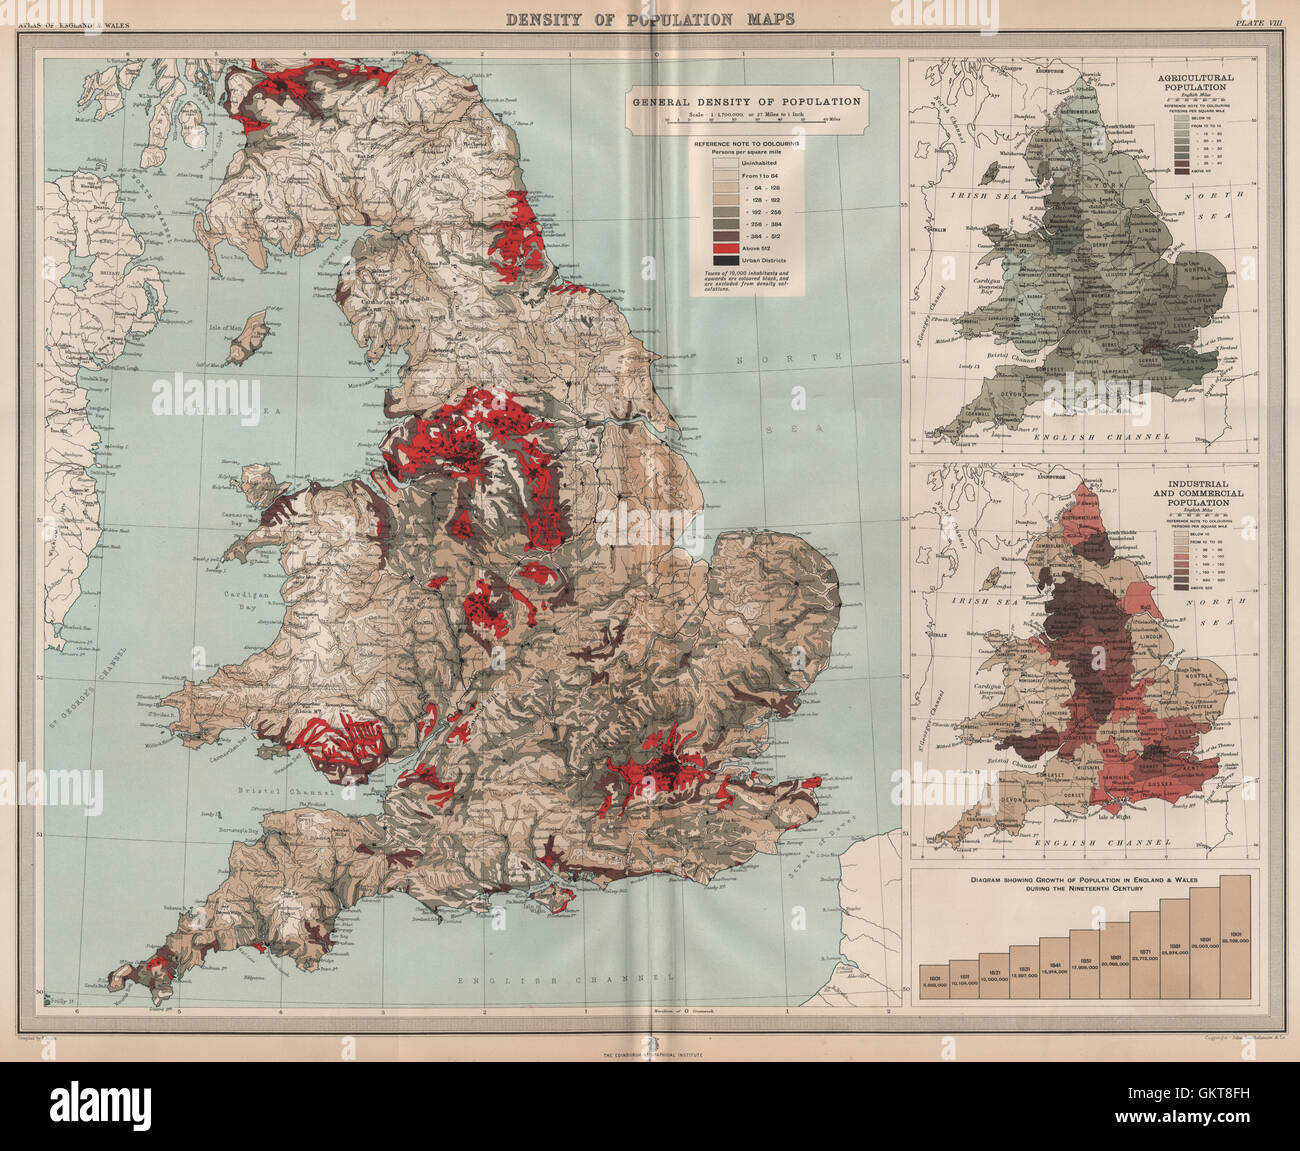 ENGLAND & WALES. Population density. Agricultural Industrial. LARGE, 1903 map Stock Photo